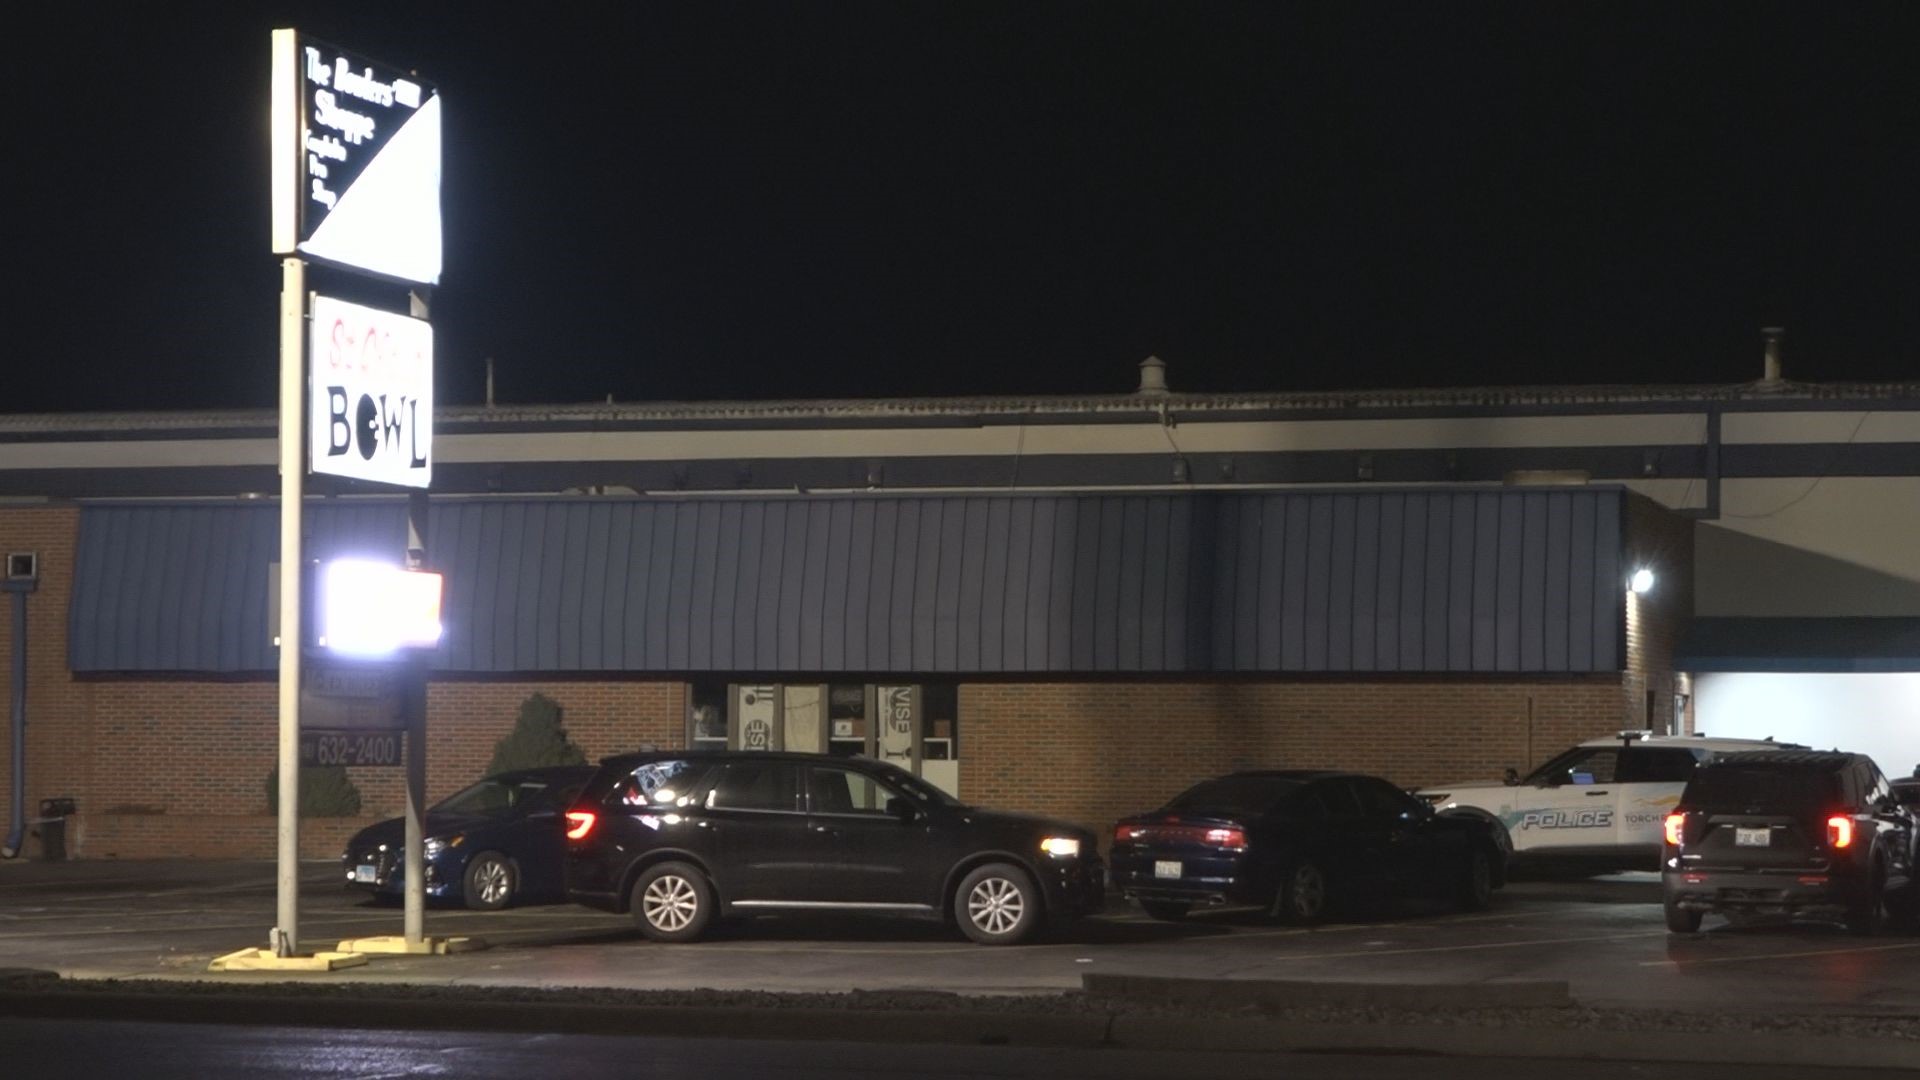 Shocking news, st clair bowl shooting: What sparked the shooting at Metro East bowling alley. 37